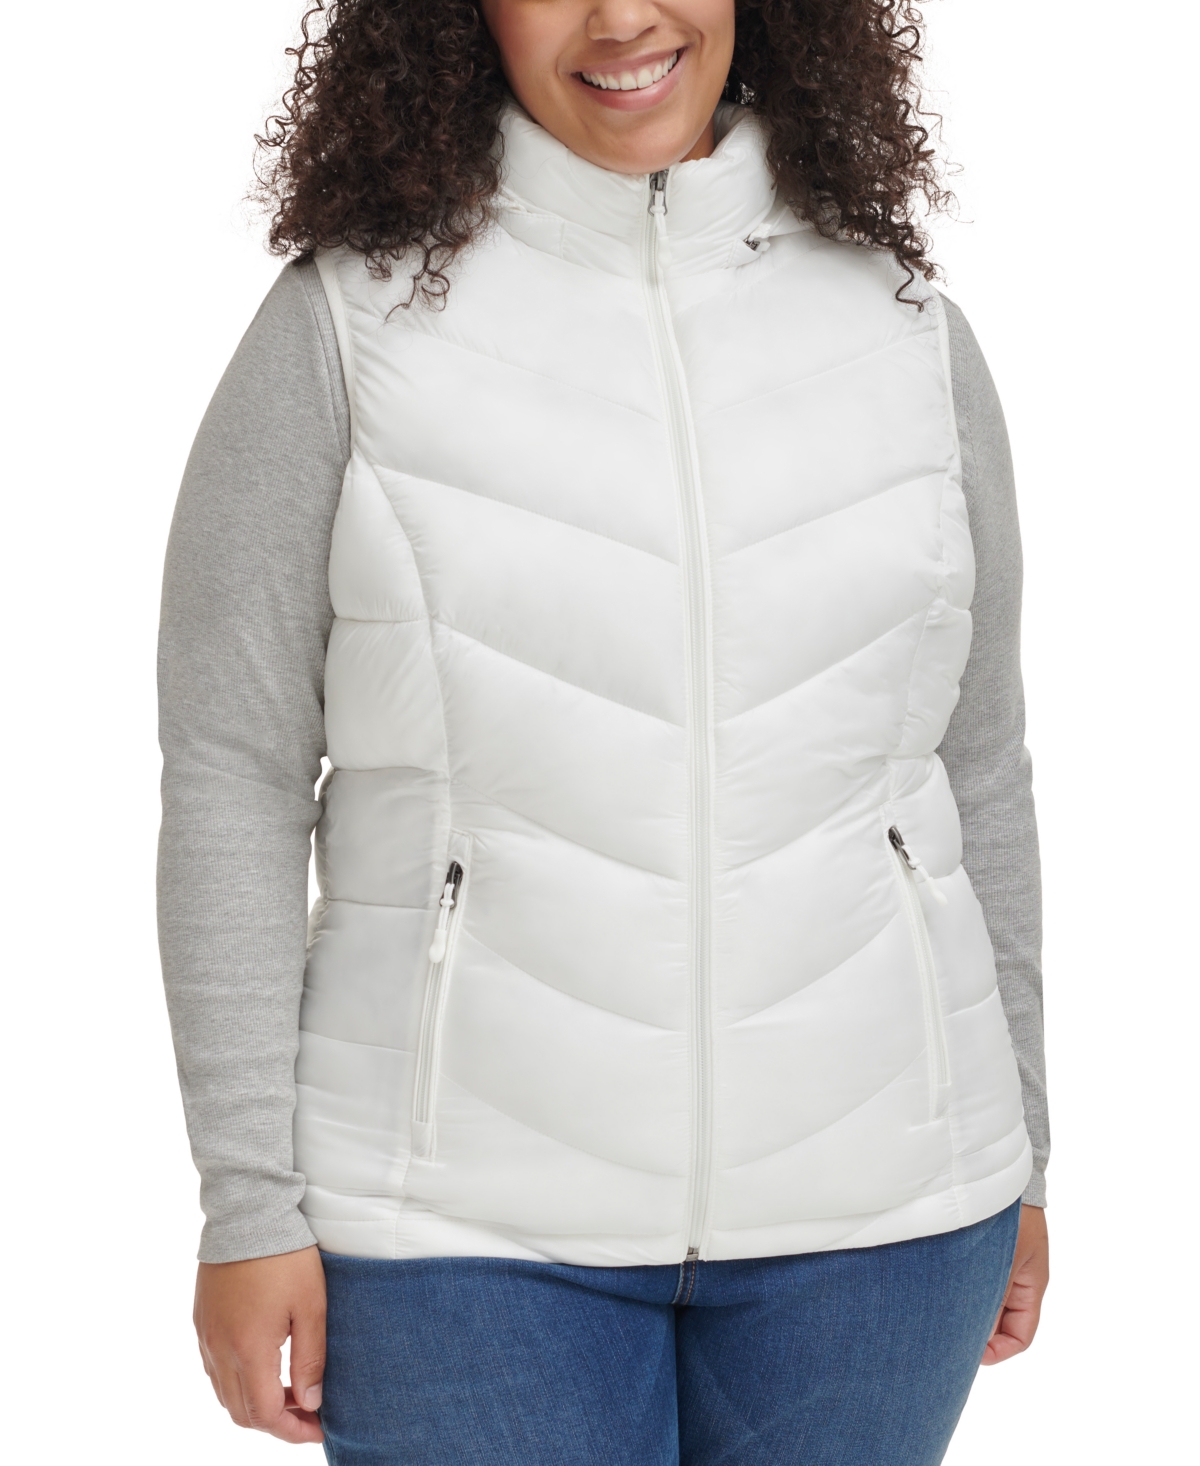 Women's Plus Size Packable Hooded Puffer Vest, Created for Macy's - Black